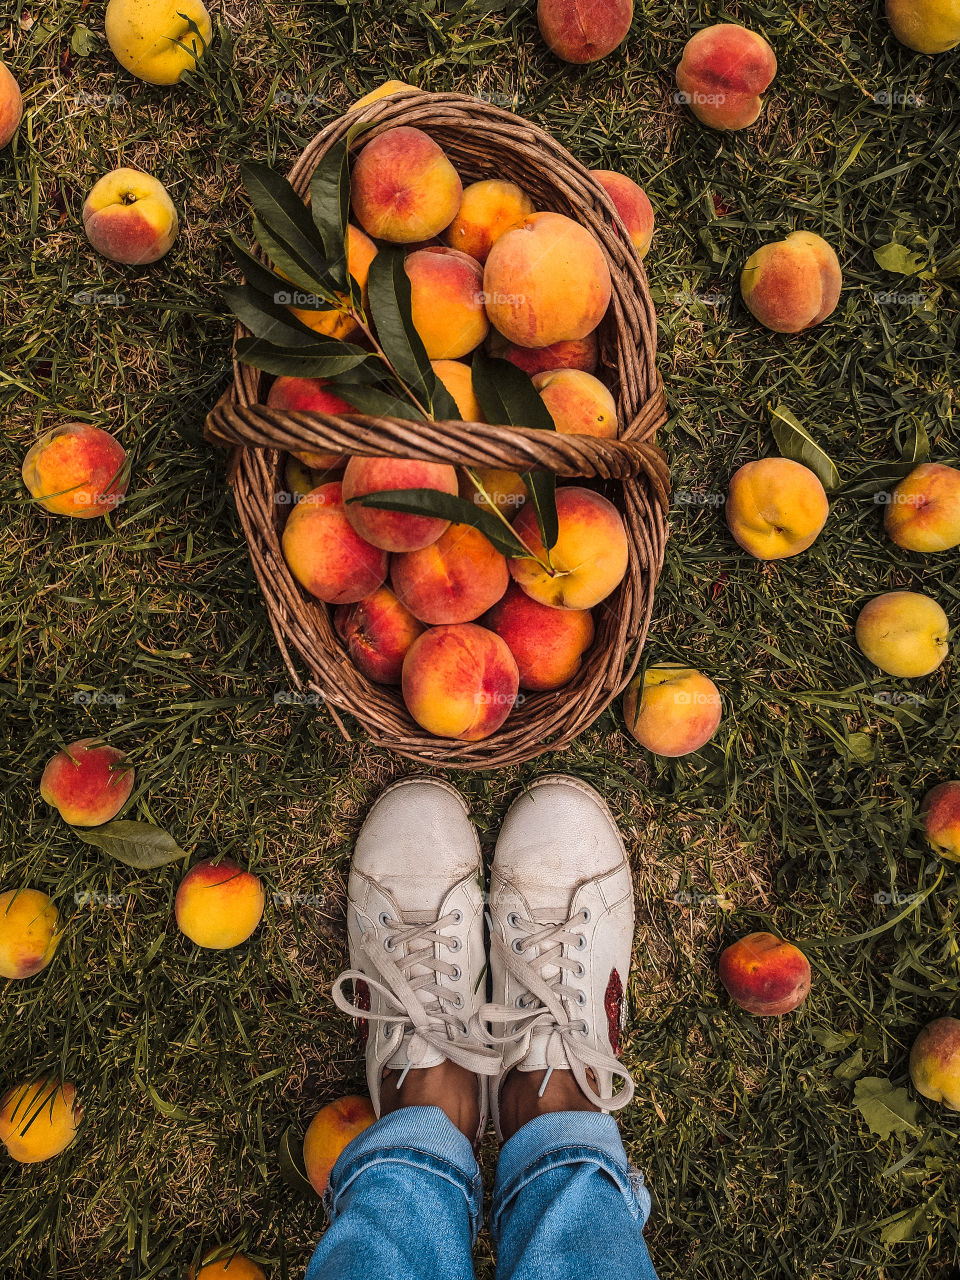 harvest of peaches in the basket and on the grass